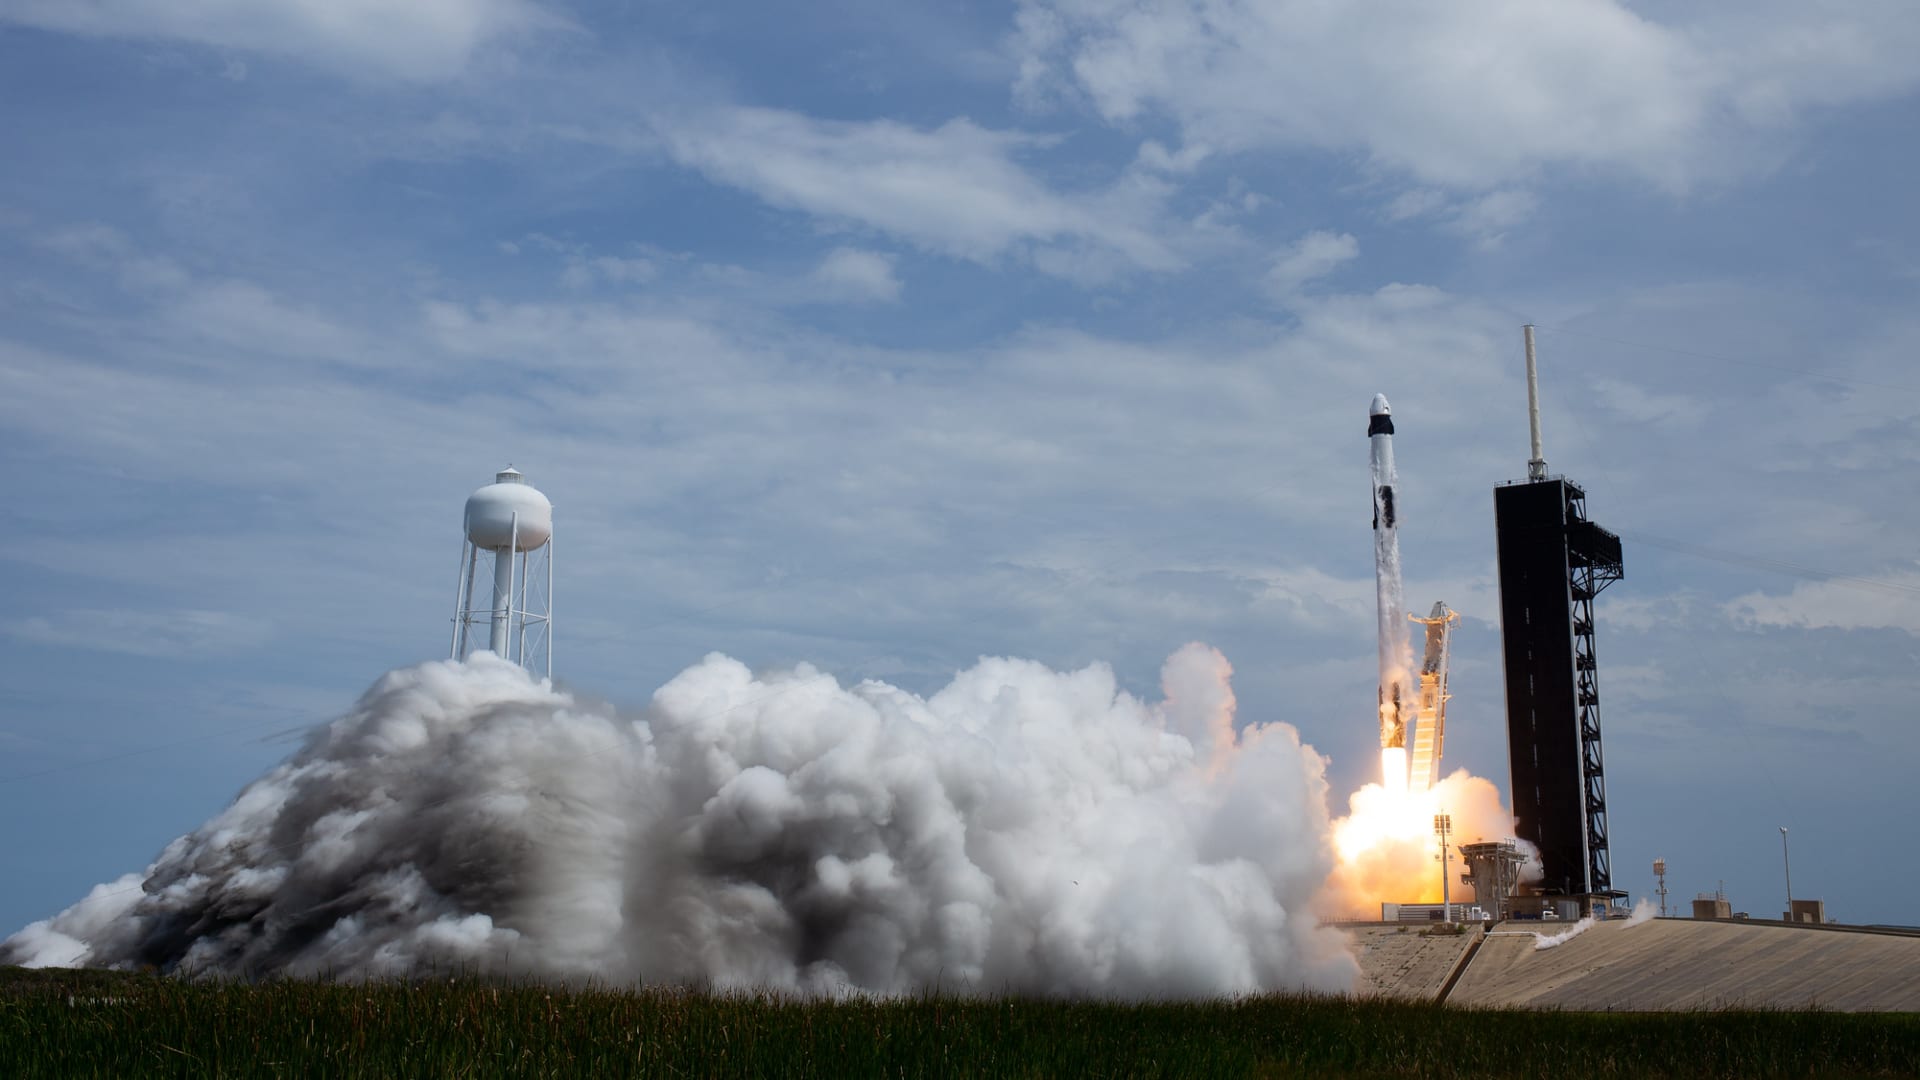 A SpaceX Falcon 9 rocket carrying the company's Crew Dragon spacecraft is launched on the Demo-2 mission with NASA astronauts Robert Behnken and Douglas Hurley onboard.